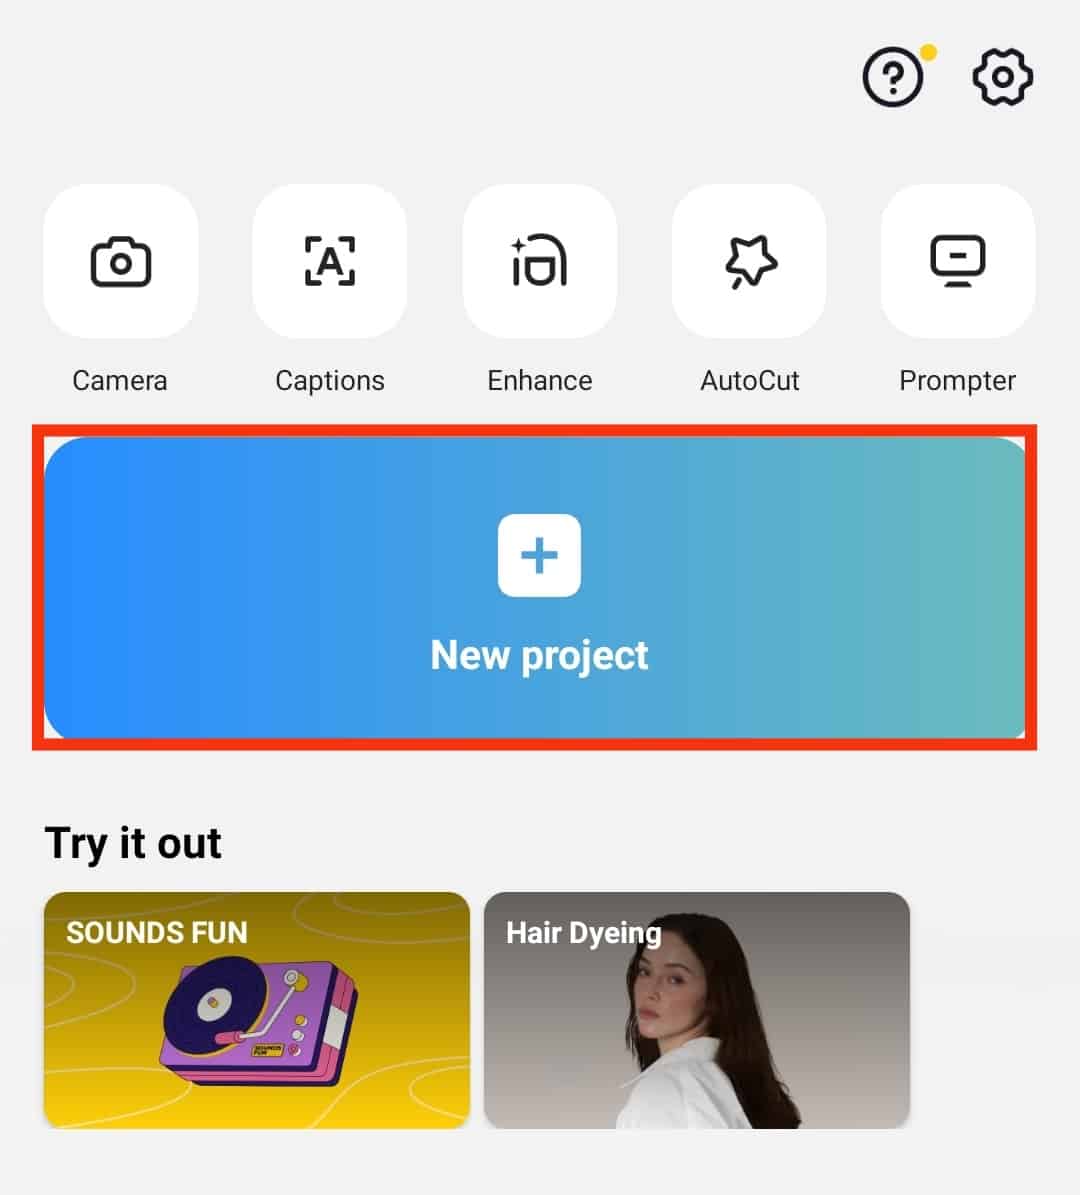 Tap On The New Project Option